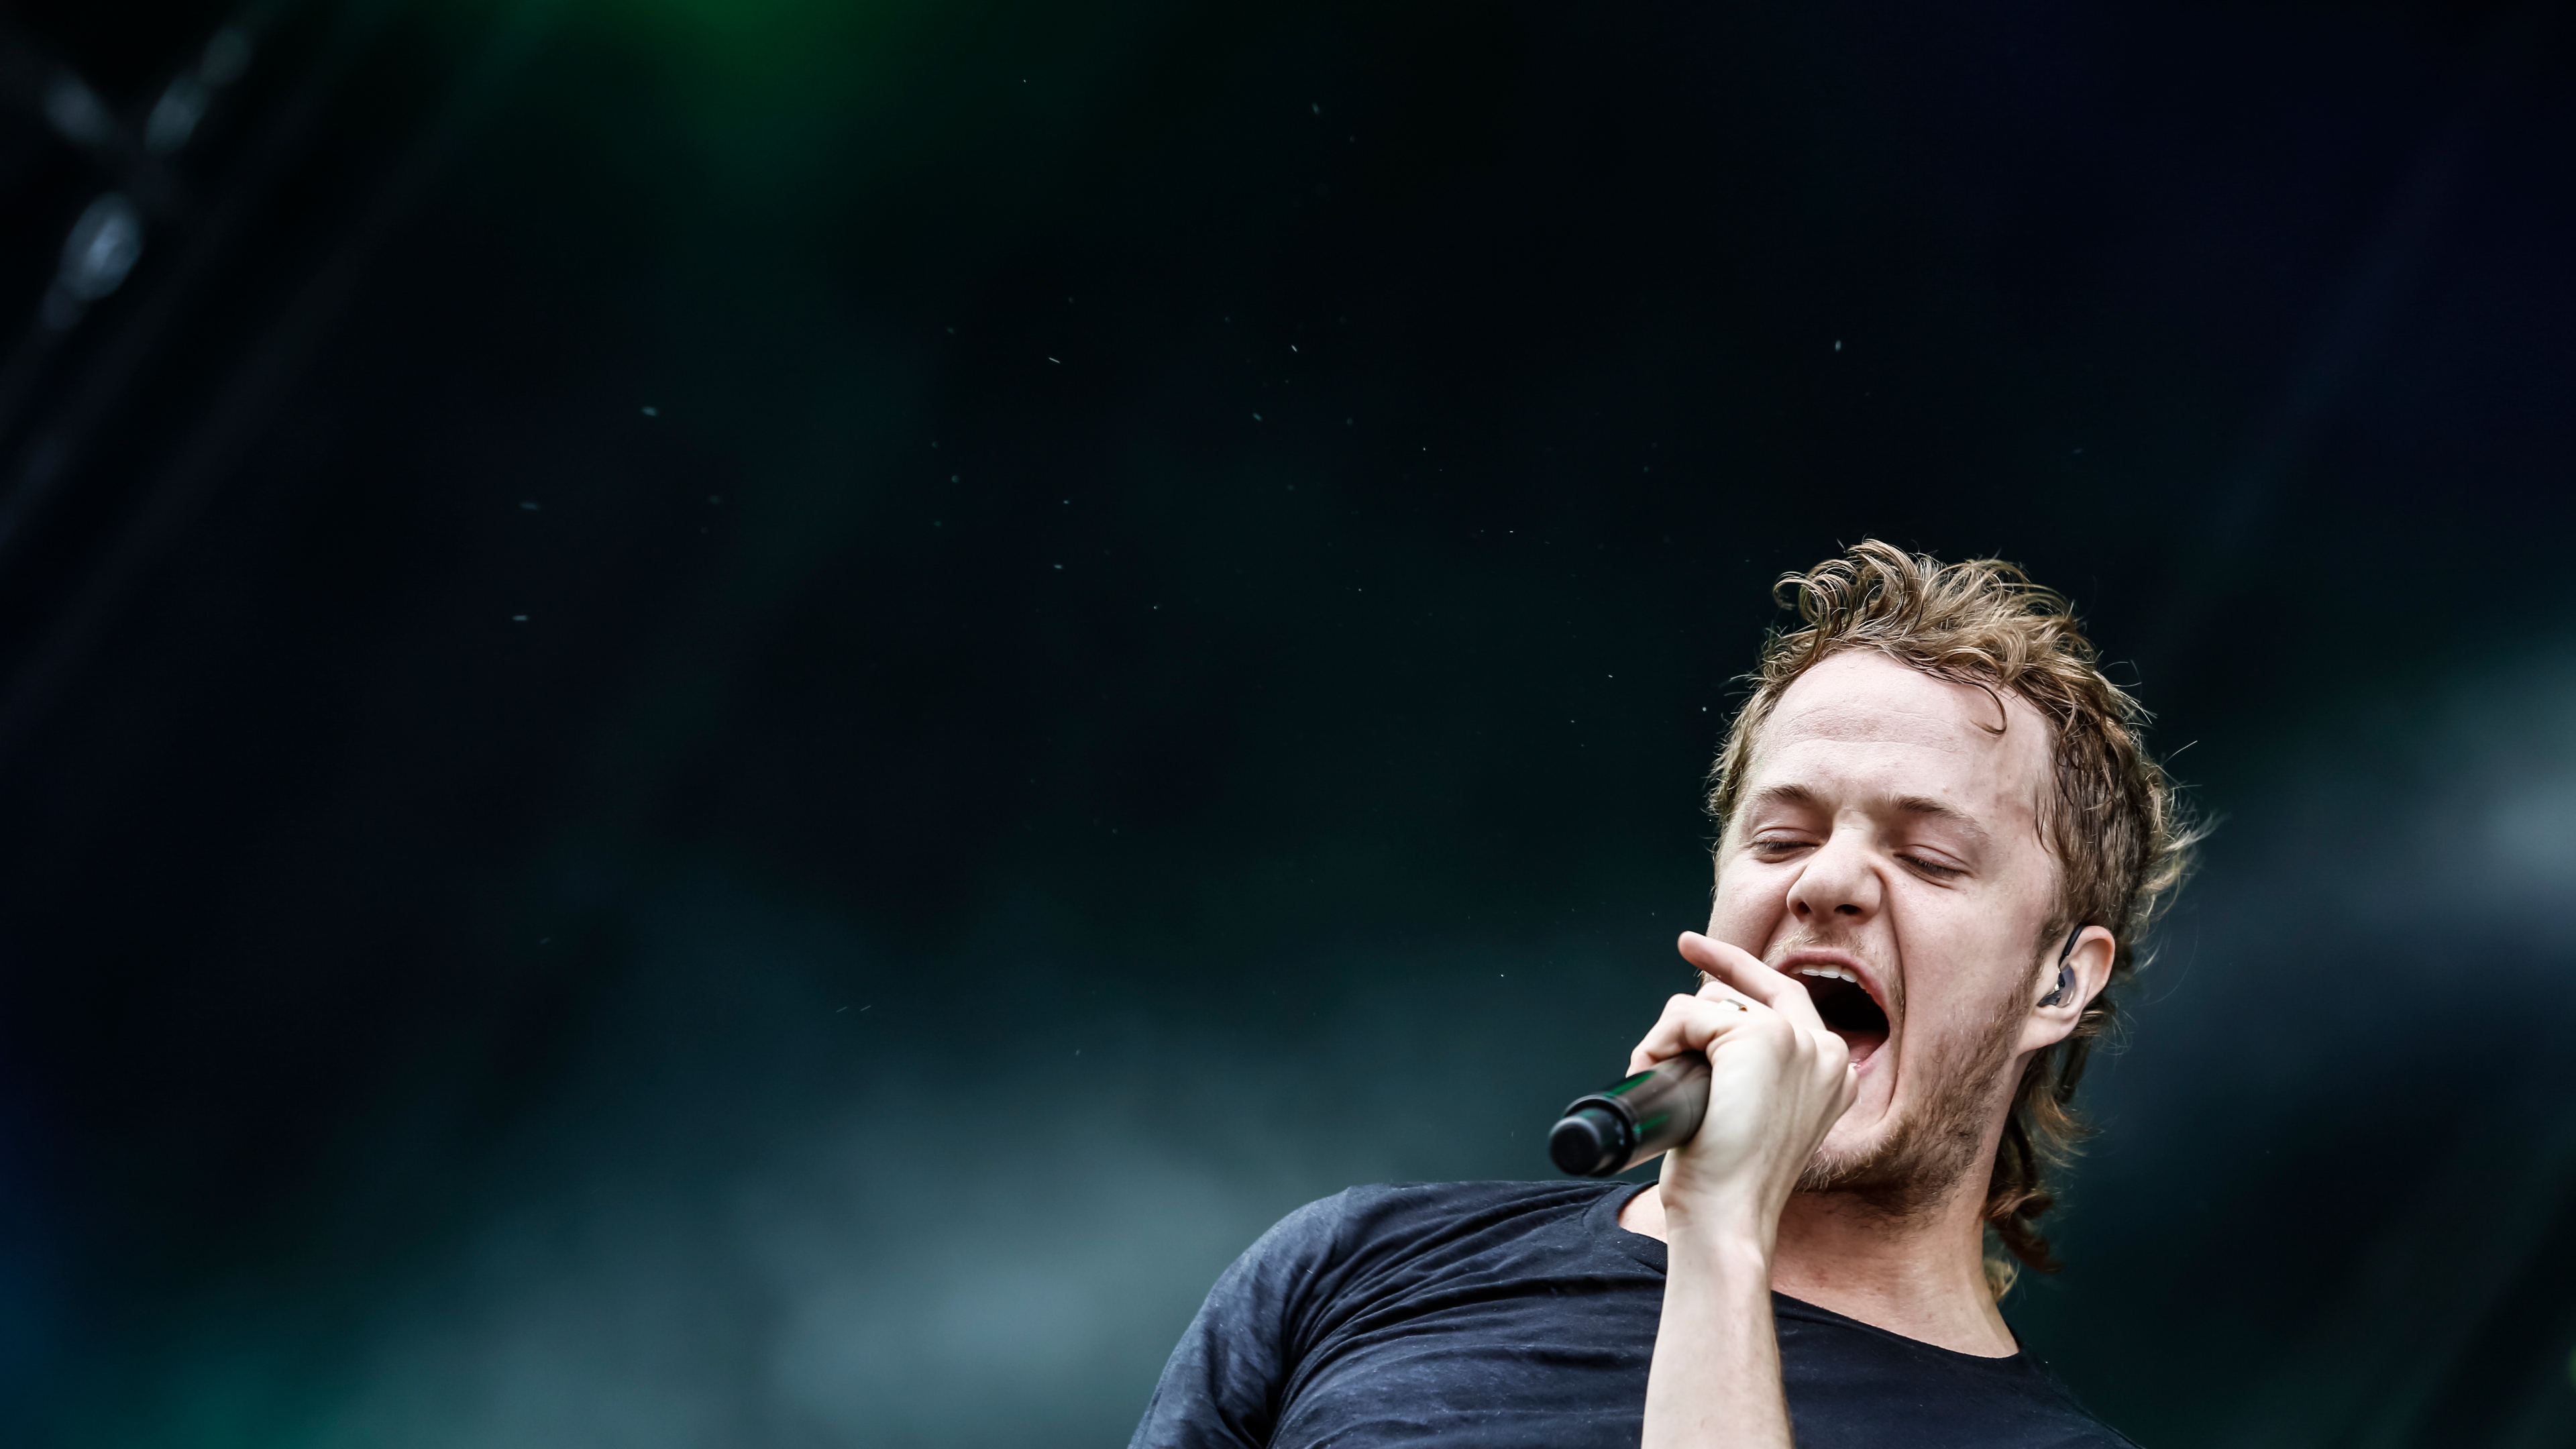 Imagine Dragons 4k Ultra HD Wallpaper And Background